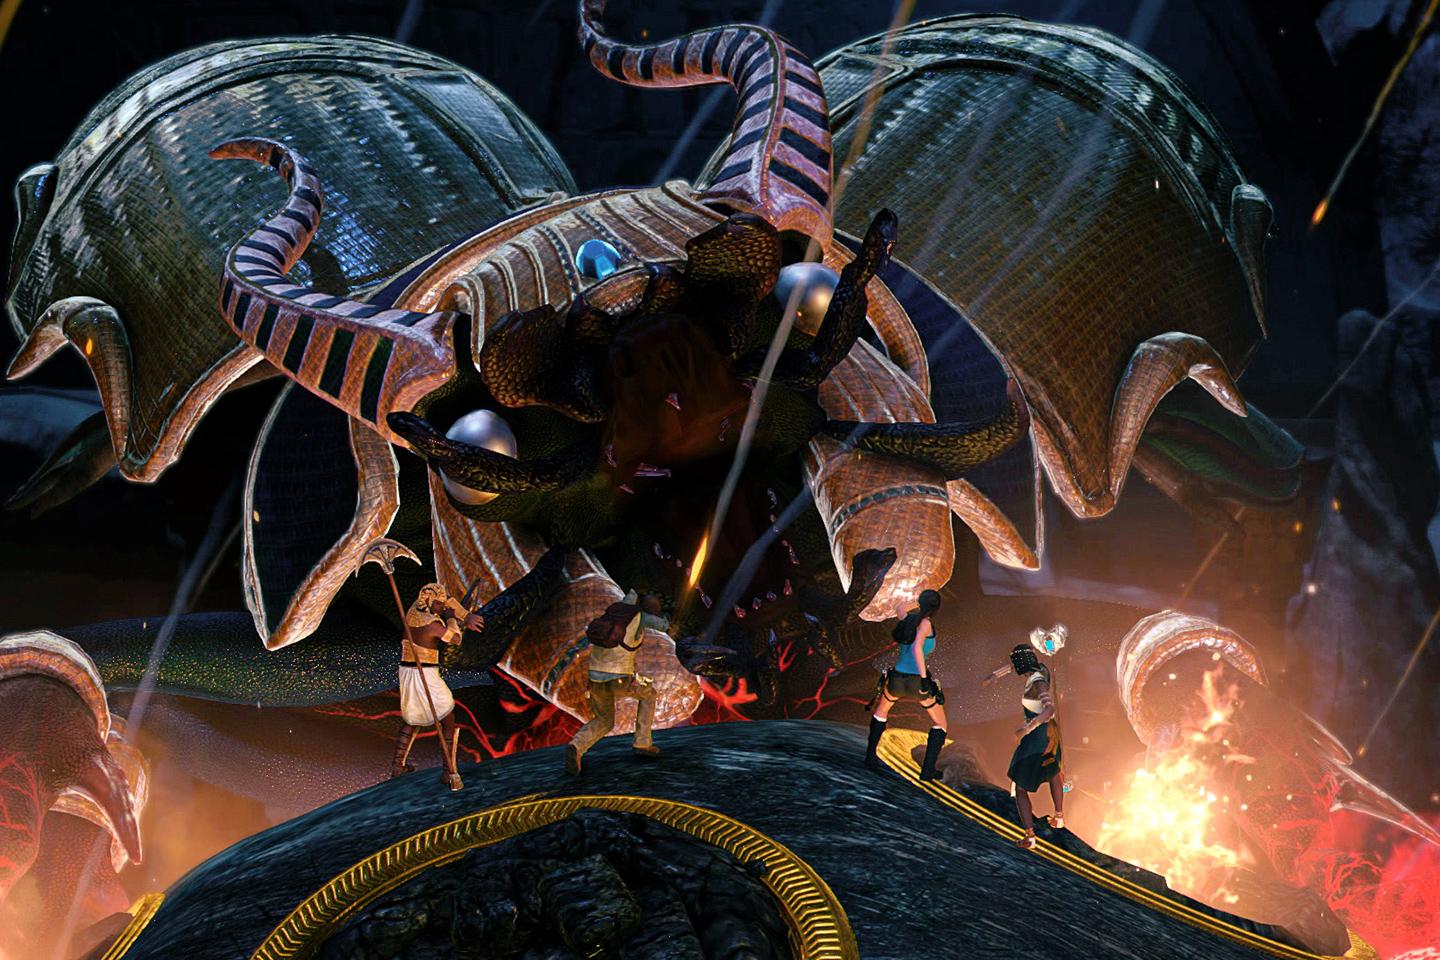 A dramatic moment from a Tomb Raider game, showing characters in a heated battle with a giant multi-headed snake statue, amidst a backdrop of fiery chaos.